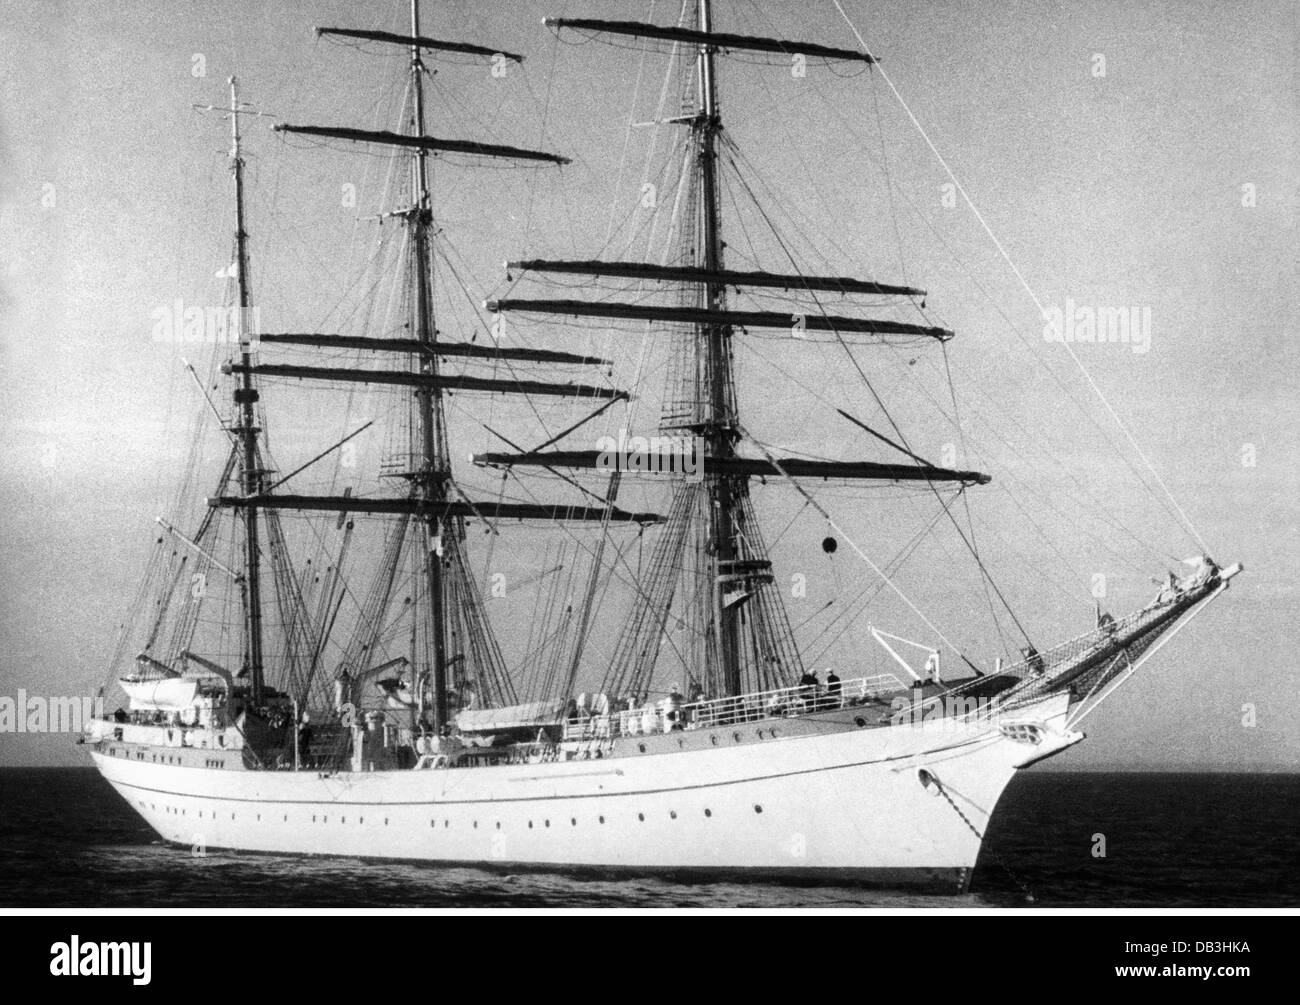 military, Germany, Bundeswehr, Navy, sailing school ship "Gorch Fock", built by Blohm und Voss, Hamburg, commissioned 1958, view, port, New York Harbour, 5.8.1962, Additional-Rights-Clearences-Not Available Stock Photo